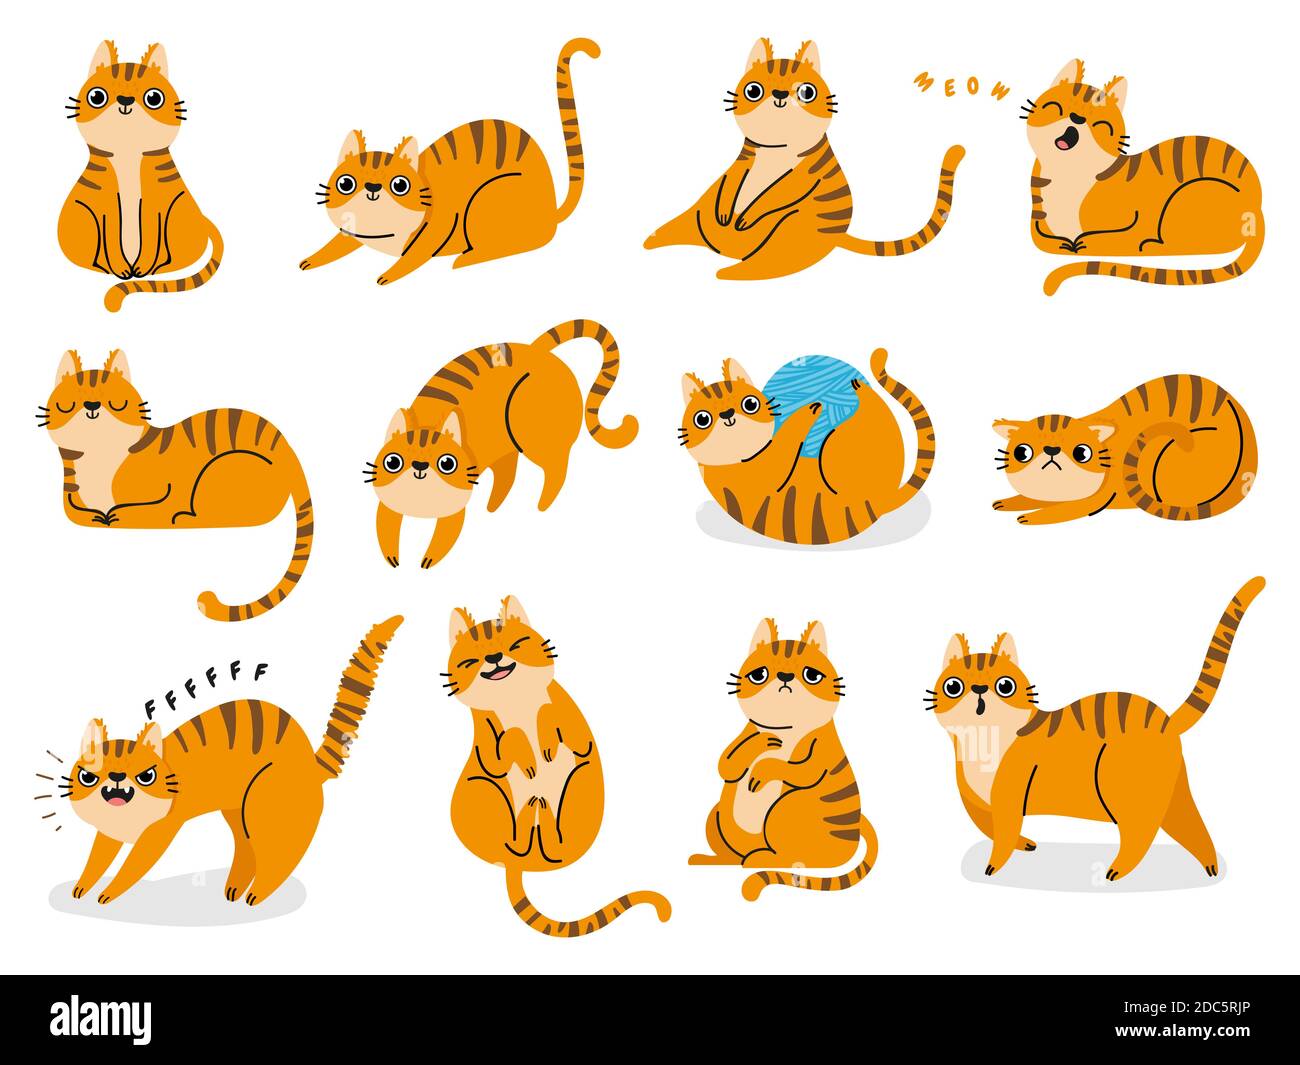 Cat poses. Cartoon red fat striped cats emotions and behavior. Animal pet kitten playful, sleeping and scared. Cat body language vector set Stock Vector